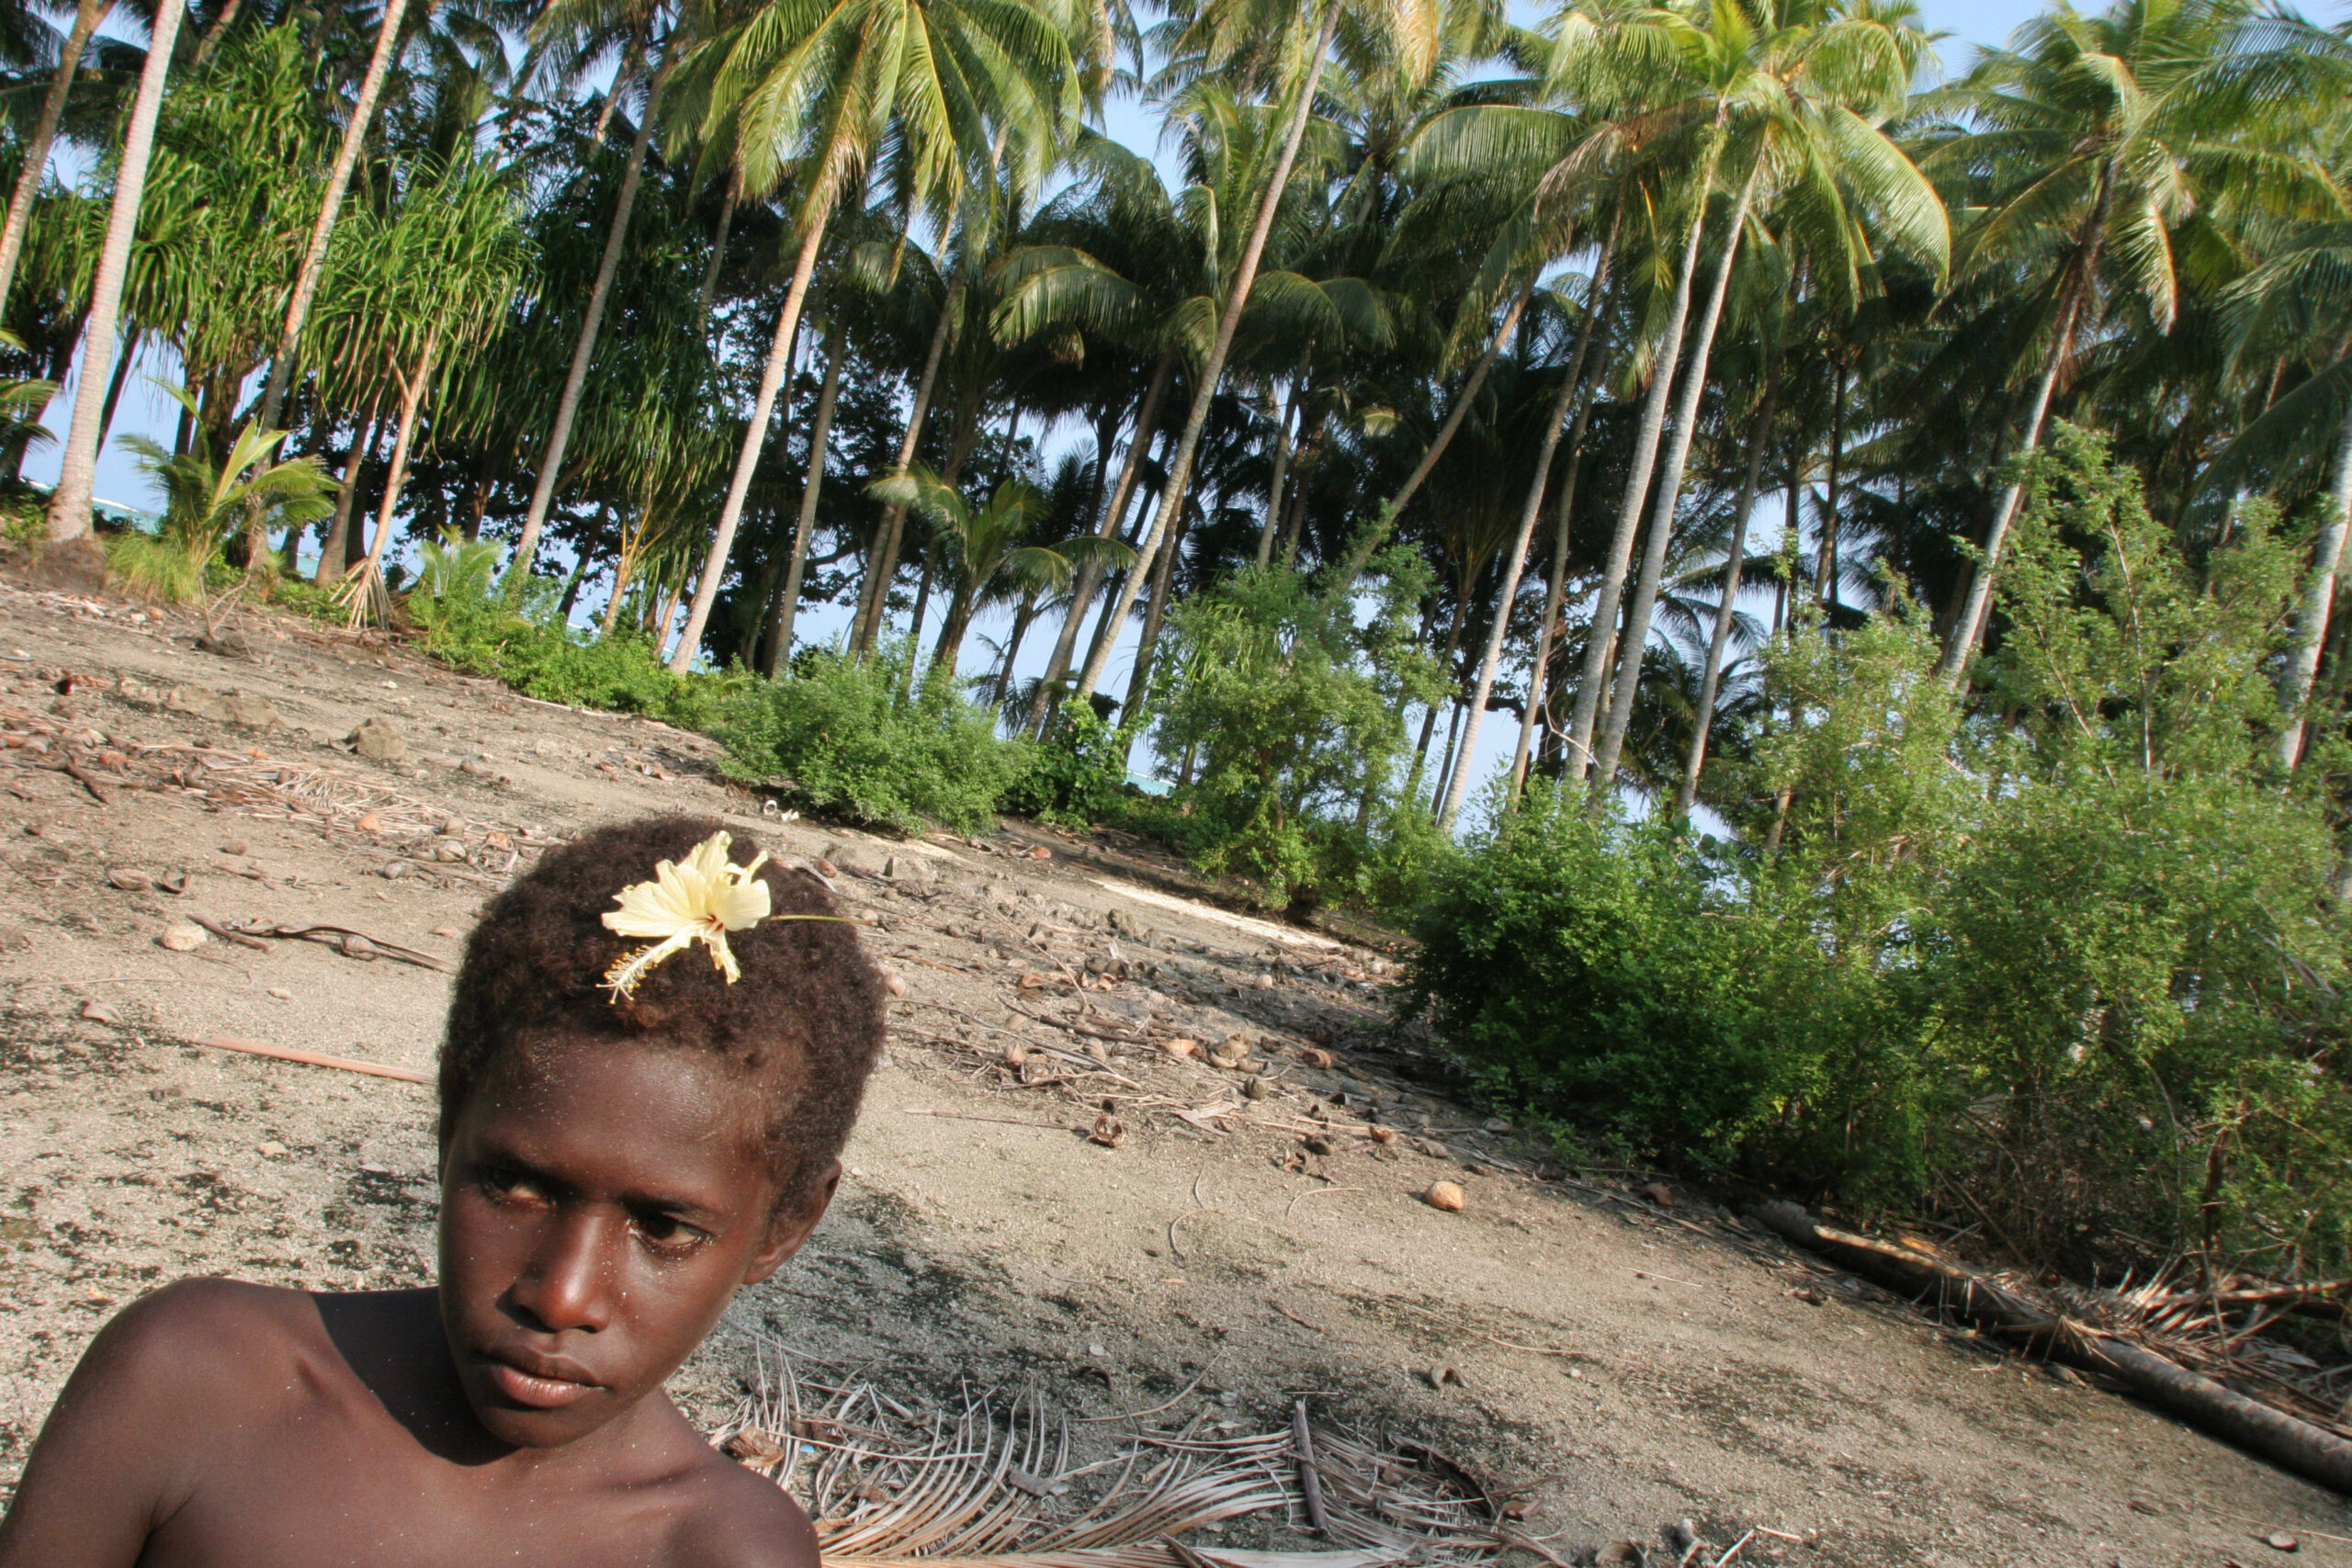 Jeremy Sutton Hibbert People Portrait Documentary Reportage Corporate Environmental CSR Social Enterprise Lifestyle Photographer Photography Local Regional Global Scottish Scotland Edinburgh Glasgow A child with a flower in his hair, in the "garden", an area formerly used for growing crops, but now barren and destroyed by salt sea water waves, on Puil Island, Carteret Atoll, Papua New Guinea, Rising sea levels have eroded much of the coastlines of the low lying Carteret islands situated 80km from Bougainville island, in the South Pacific and waves have crashed over the islands flooding and destroying what little crop gardens the islanders have. Food is in short supply, banana and swamp taro crops are failing due to the salt contamination of the land, and the islanders live on a meagre one meal per day diet of fish and coconut. There is talk by the Autonomous Region of Bougainville government to relocate the Carteret Islanders to Bougainville island, but this plan is stalled due to a lack of finances, resources, land and coordination.